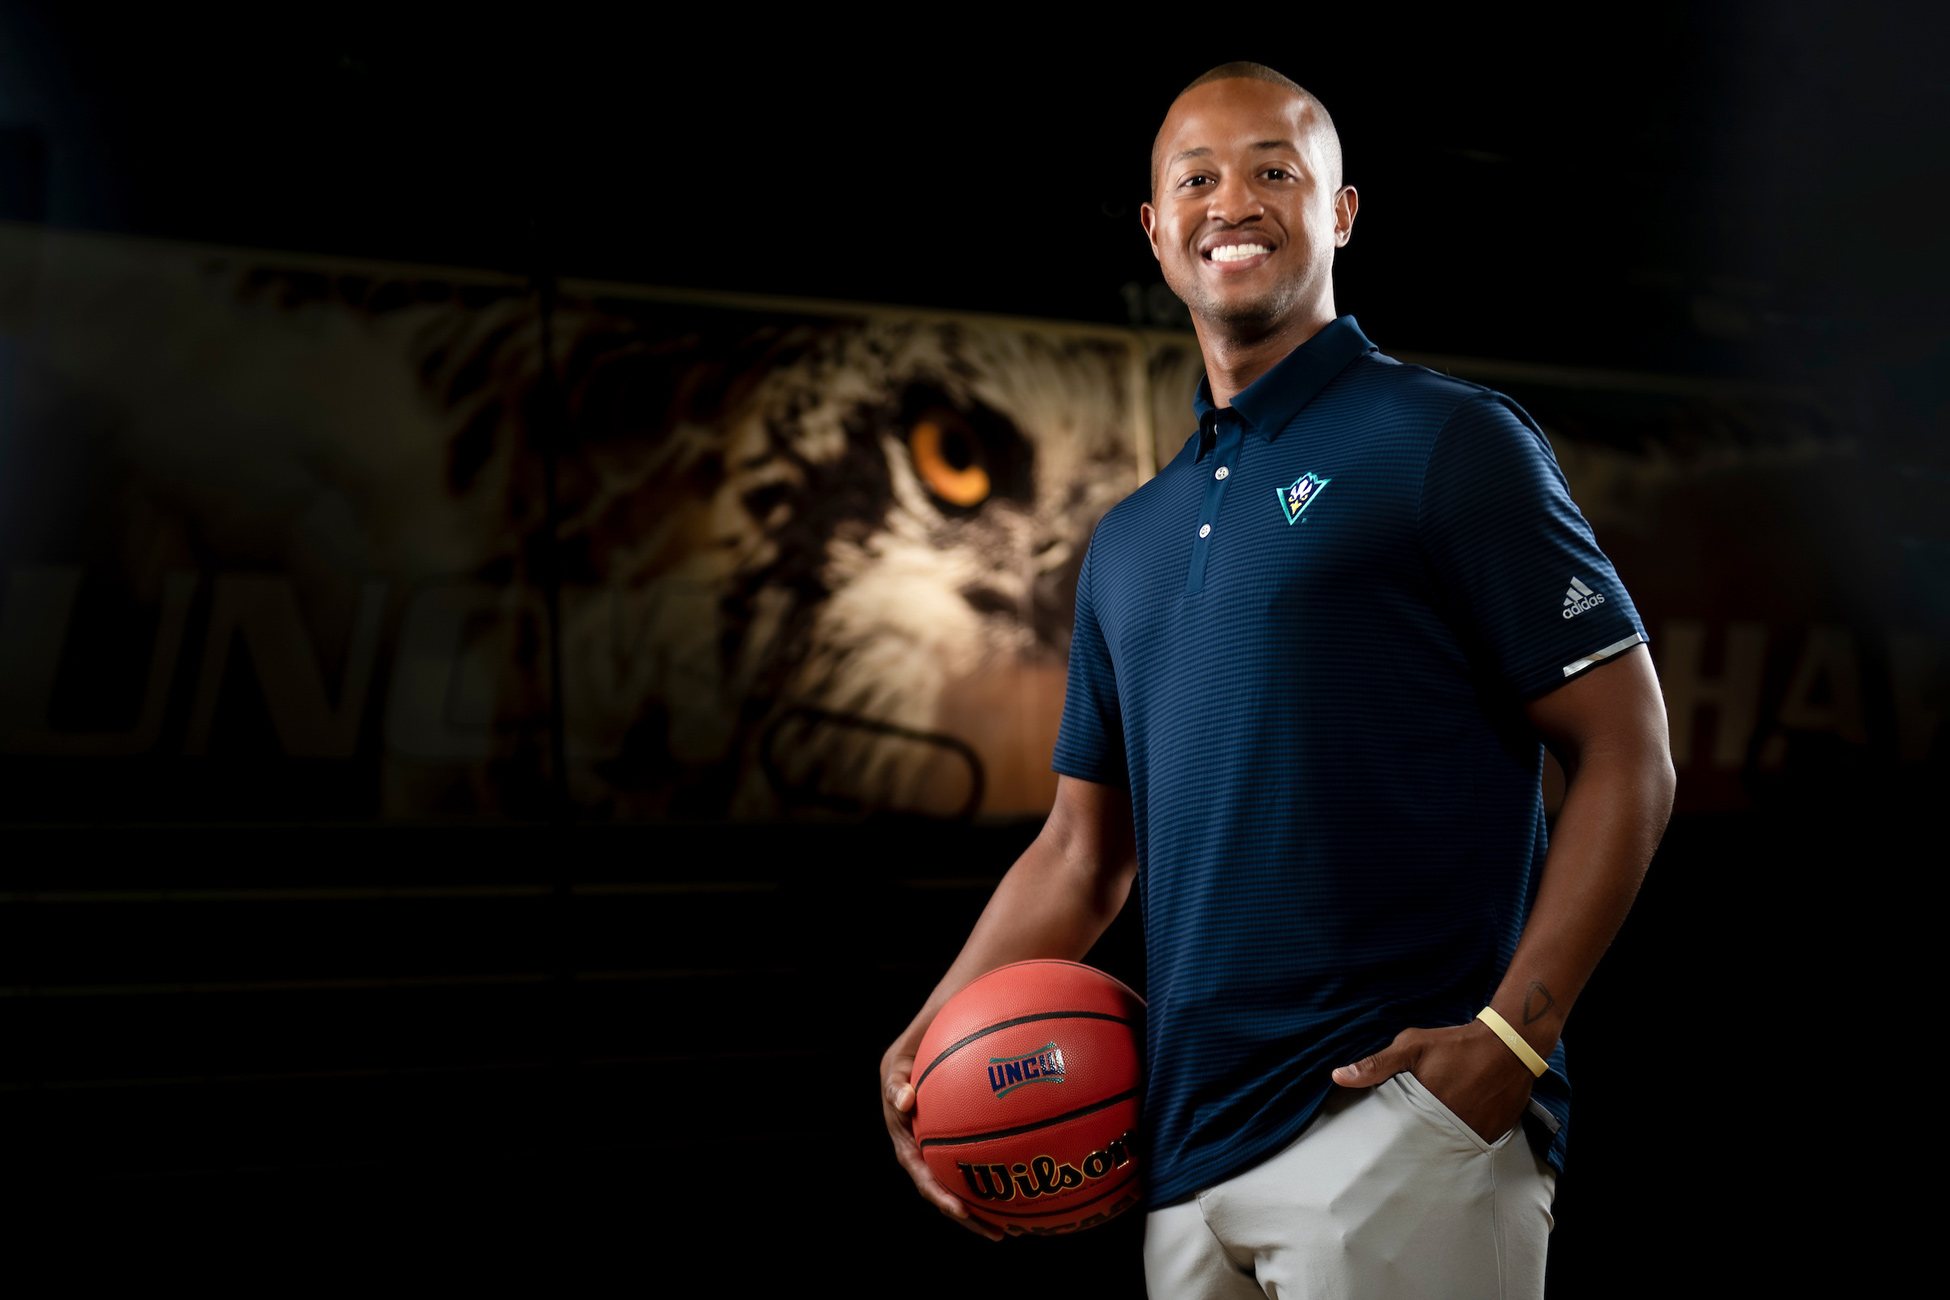 Fourth-year UNCW men's basketball head coach Takayo Siddle will be among the Seahawks honored by the Wilmington Chamber of Commerce during the group's 5th Annual 40 Under 40 gala next month.